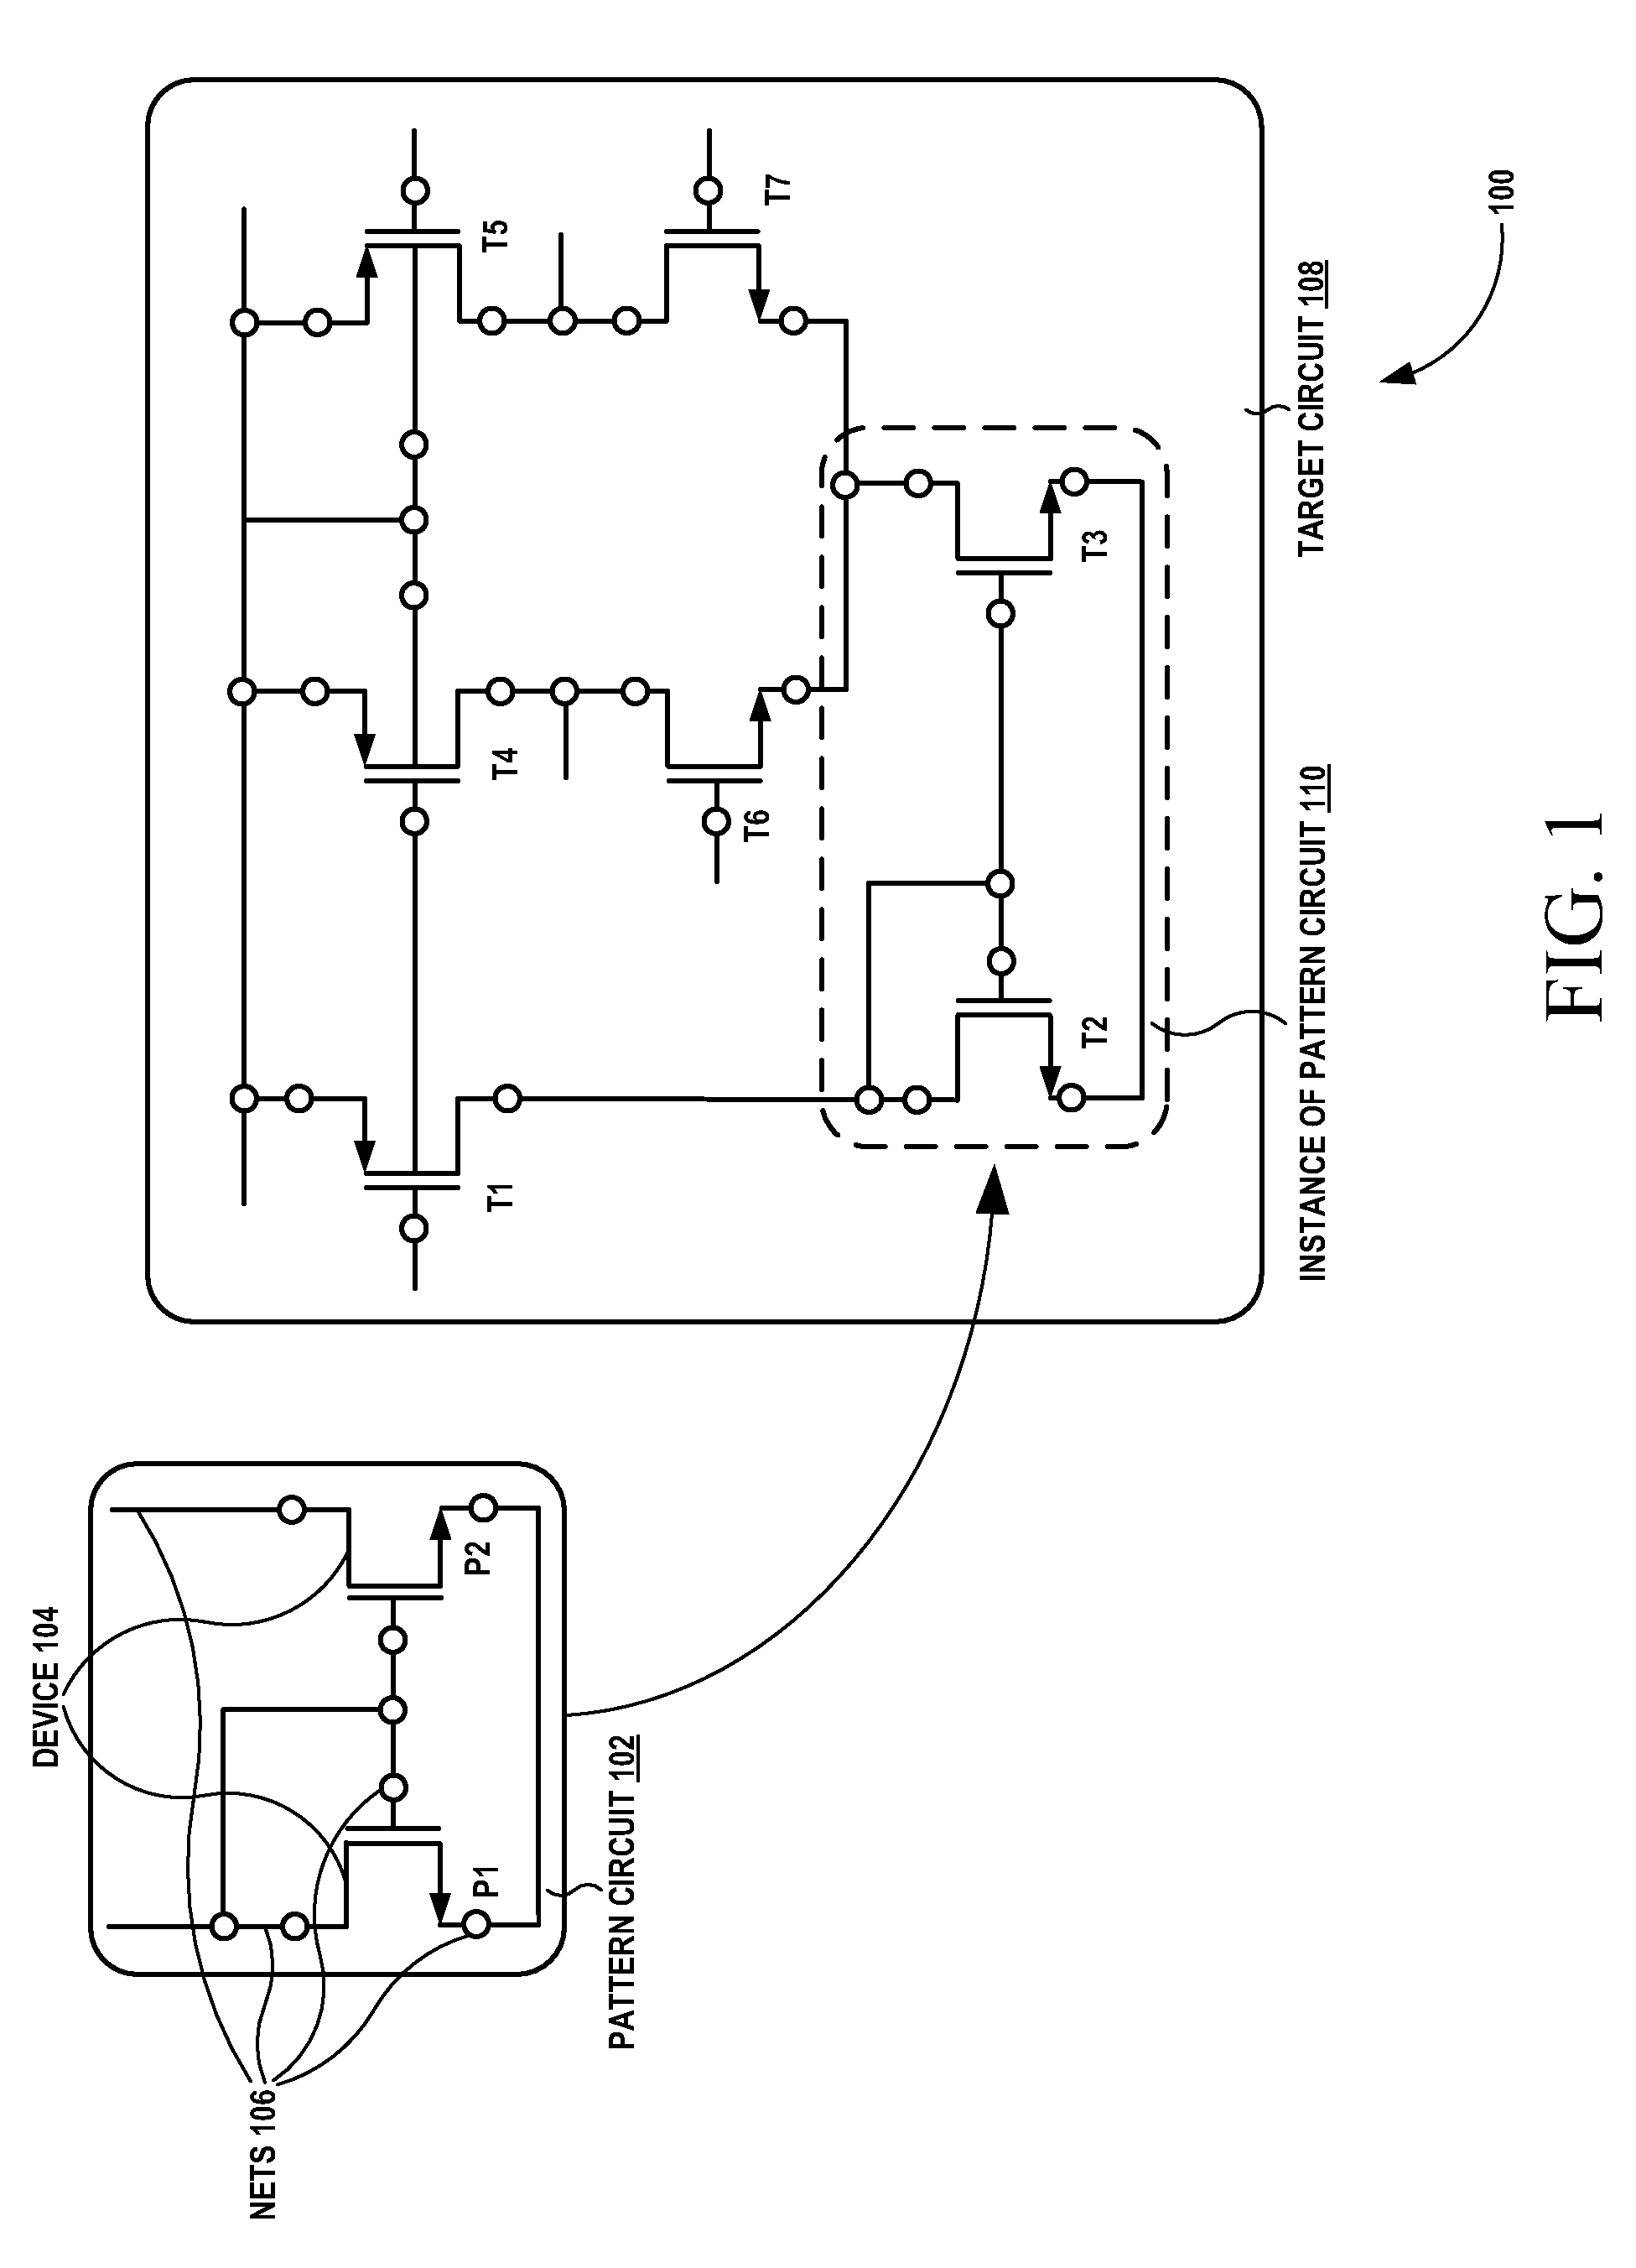 Sub-circuit pattern recognition in integrated circuit design